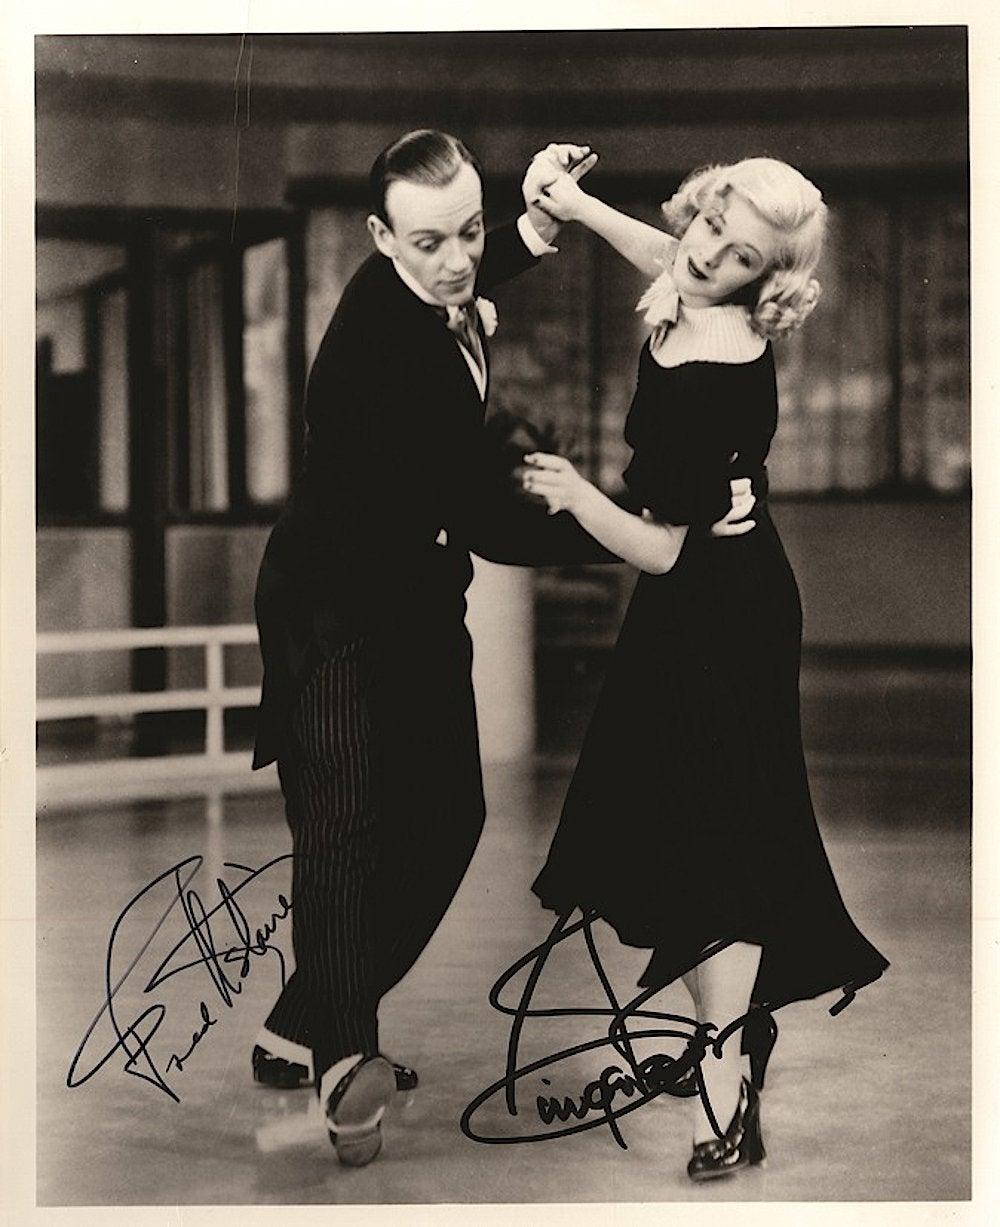 A signed photo of Fred Astaire and Ginger Rogers, the most famous dance partnership in the history of Hollywood musicals

Fred Astair (1899 - 1987) and Ginger Rogers (1911 - 1995) were one of the most iconic on-screen couples in Hollywood history.